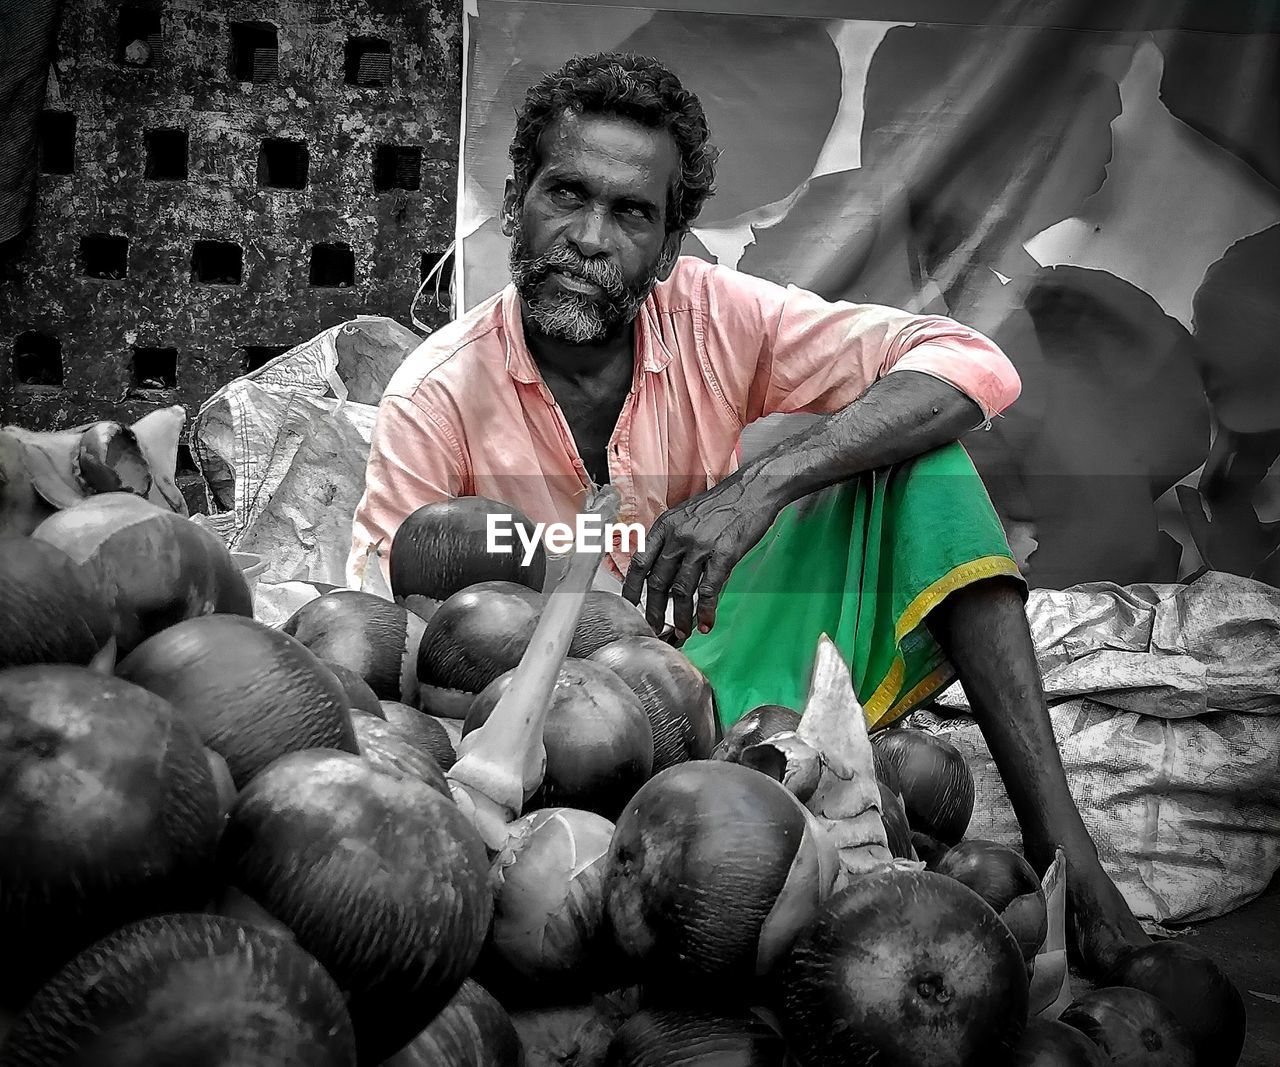 PORTRAIT OF MAN HOLDING FOOD AT MARKET STALL